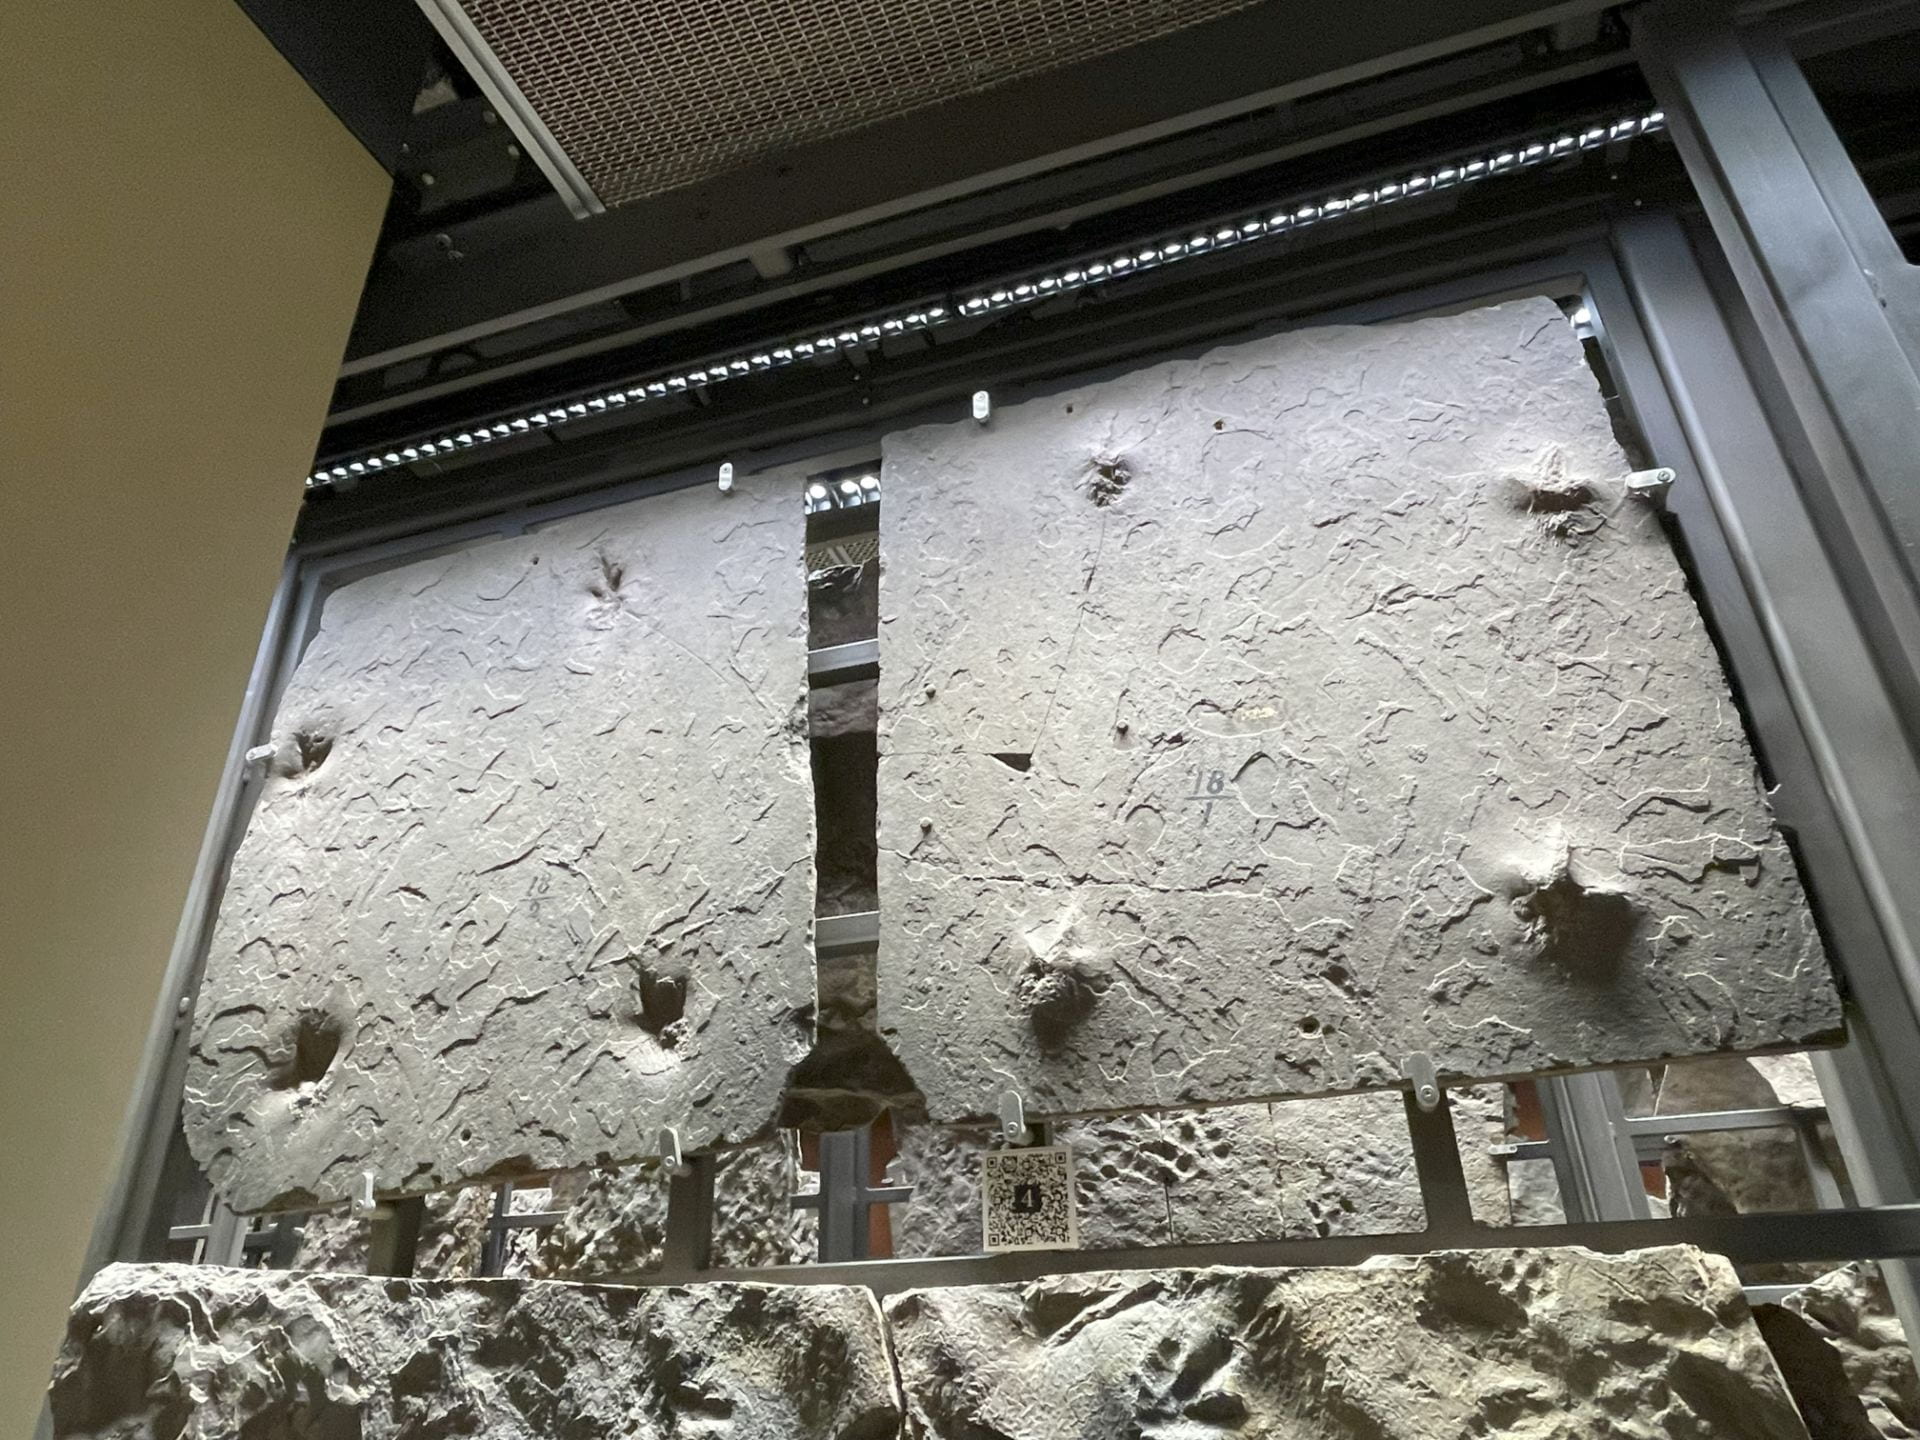 Two gray rock slabs mounted vertically on a beige wall. Each slab has footprint evidence. The left shows the impression, the right shows the natural cast.